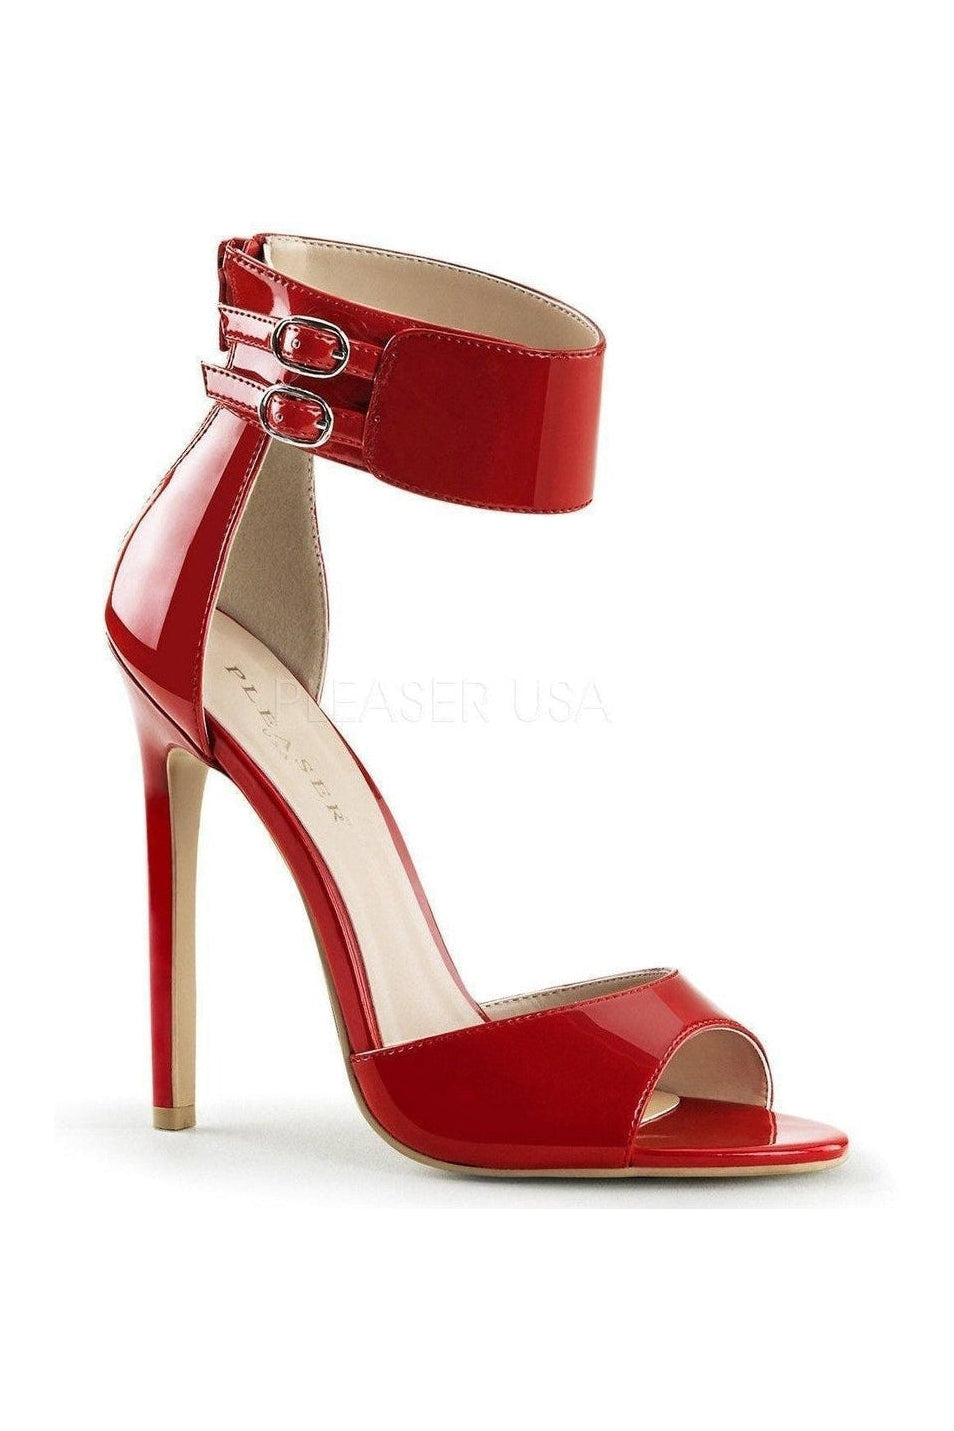 SEXY-19 Sandal | Red Patent-Pleaser-Red-Sandals-SEXYSHOES.COM